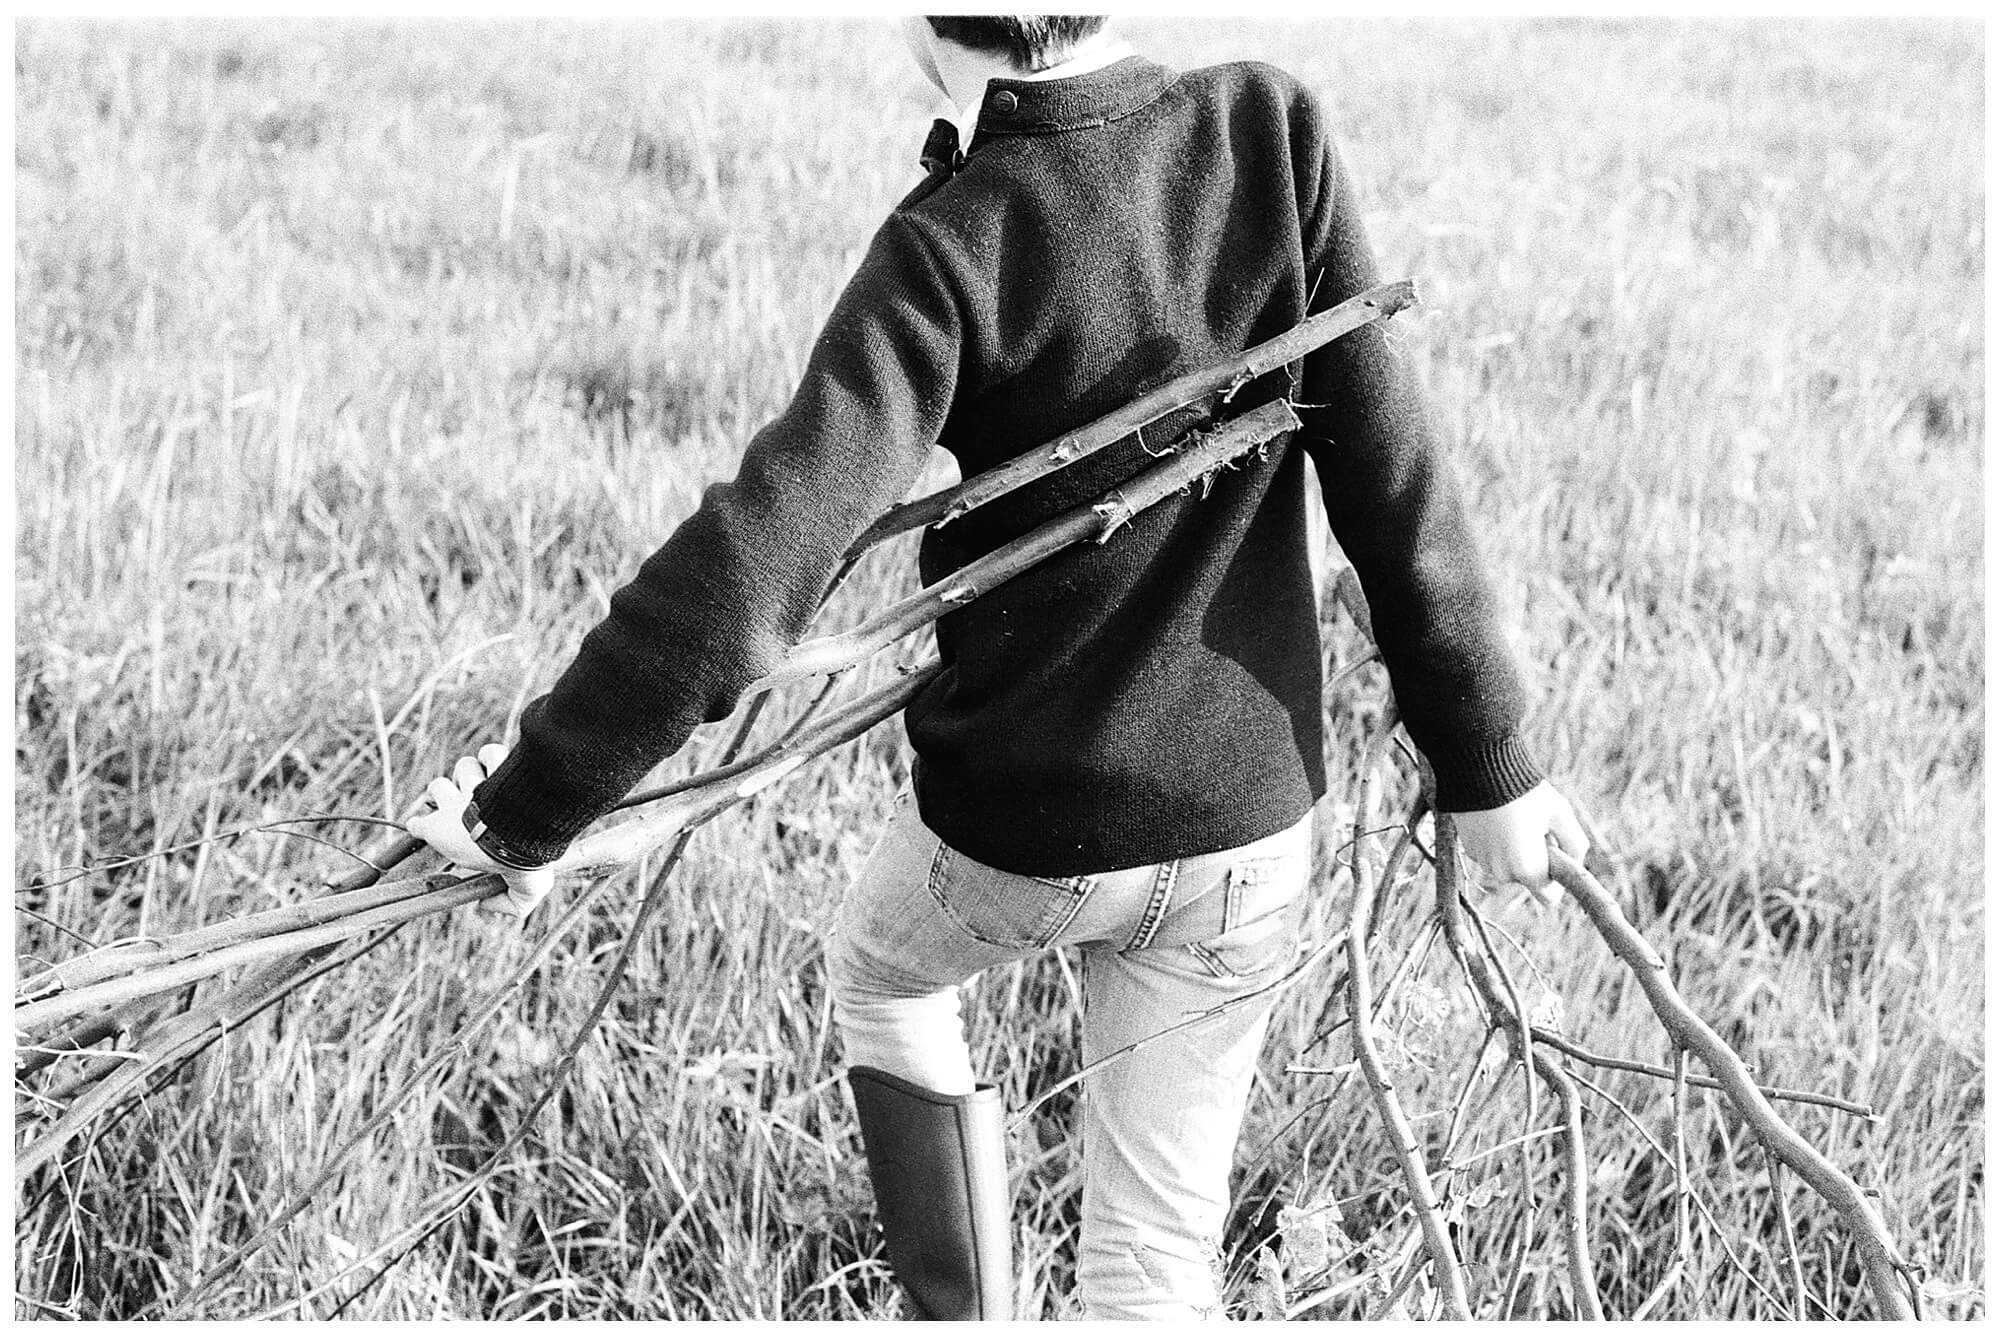 A young boy carries two large tree branches through a grassy field in the French countryside. 